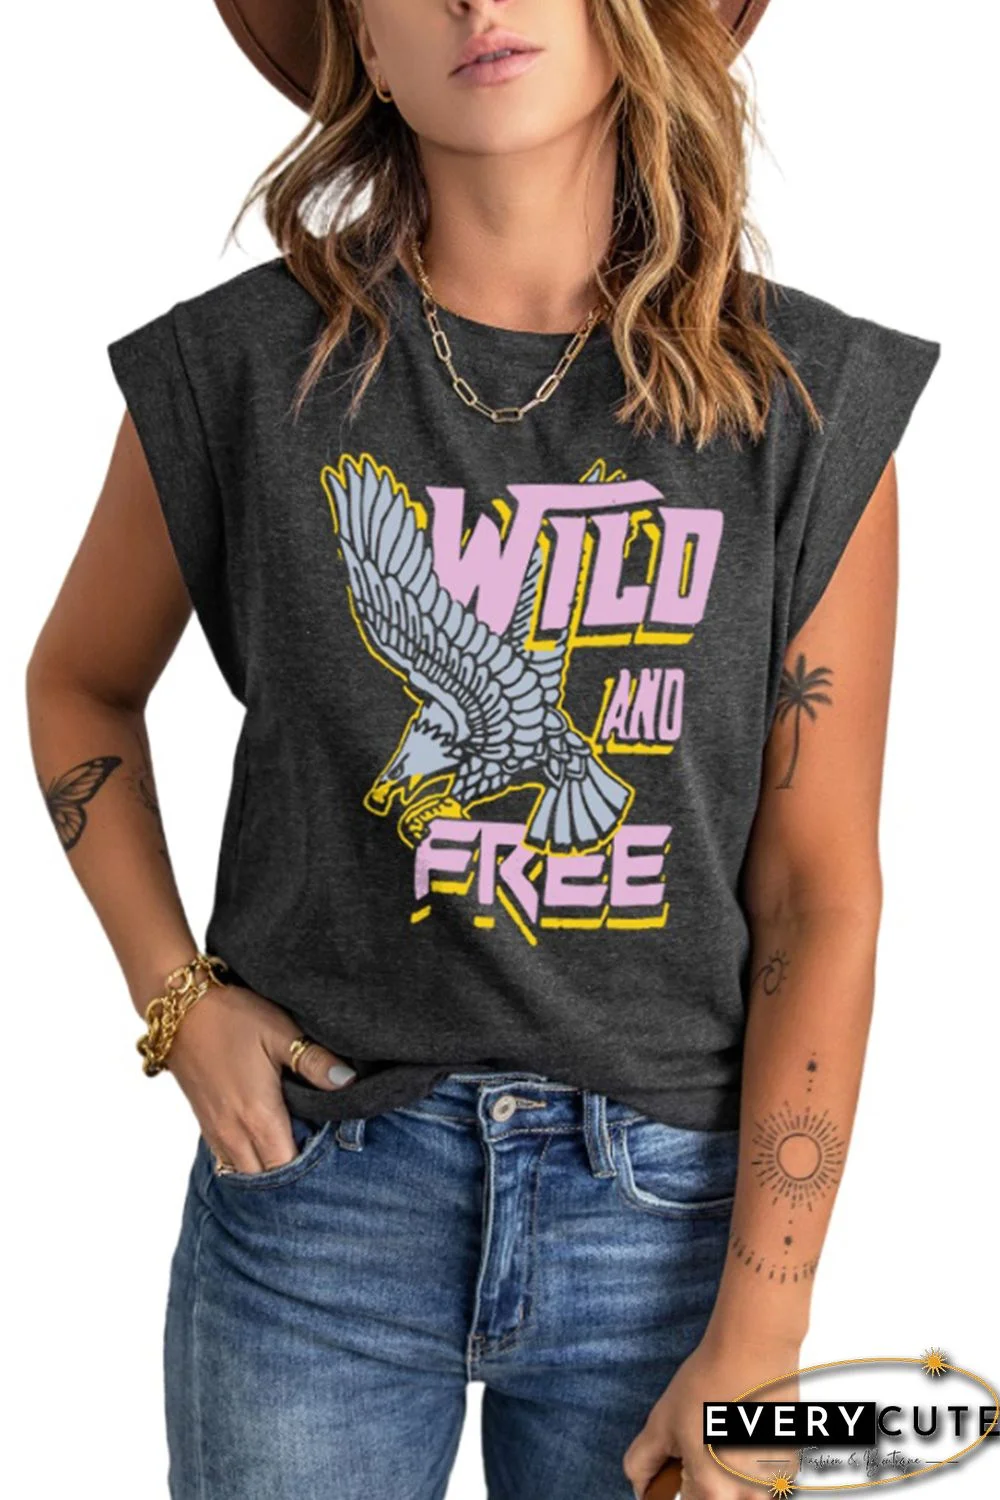 Gray WILD AND FREE Eagle Print Graphic Tee